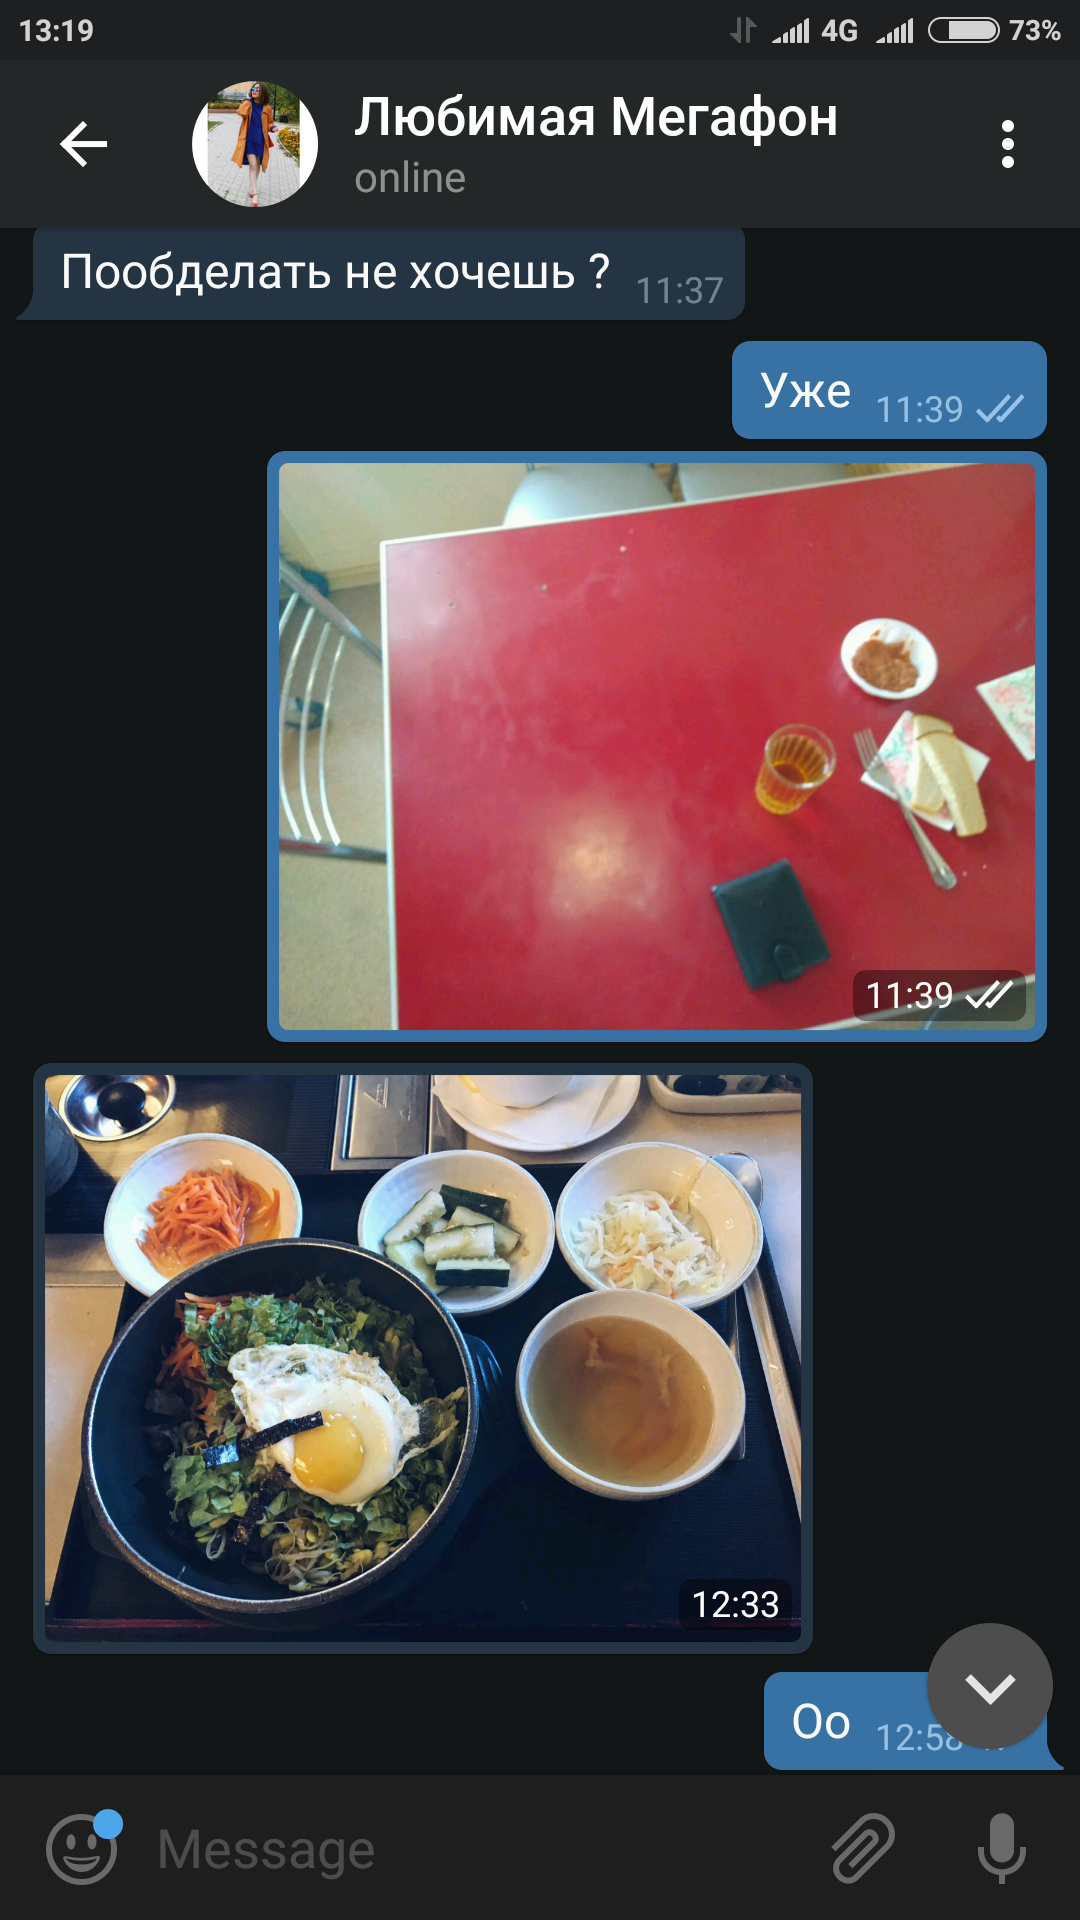 Correspondence .. husband's lunch in the dining room and wife's lunch in a restaurant =) - Canteen, A restaurant, Wife, Dinner, My